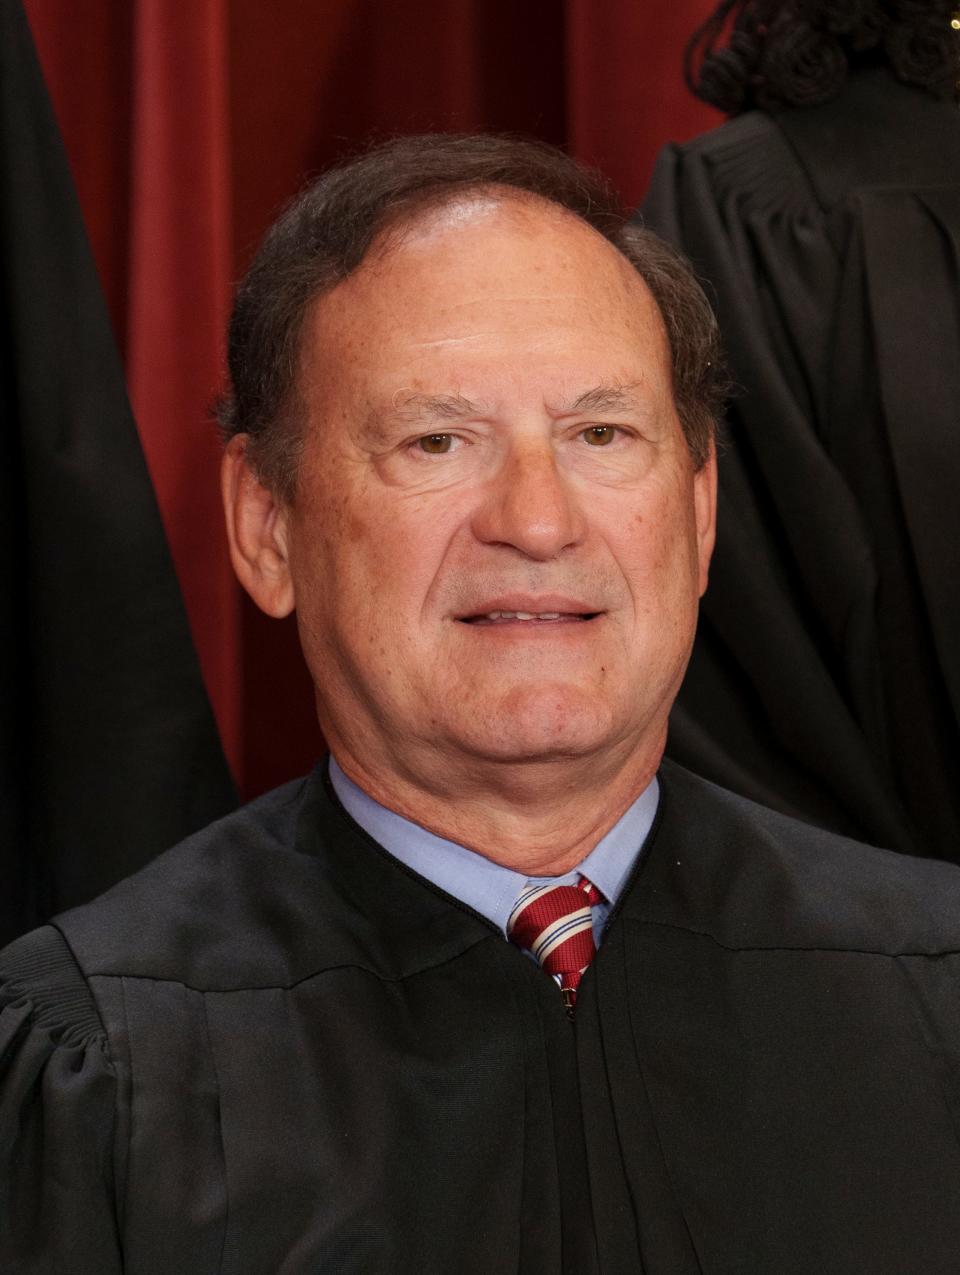 Justice Samuel Alito provoked laughter when he asked if the court would stand for newspapers receiving the same kind of pressure that the Biden administration applied to social media giants over Covid-19 disinformation, election security and other issues. "It's treating Facebook and these other platforms like they're subordinates,” Alito said. “Would you do this to the New York Times?"